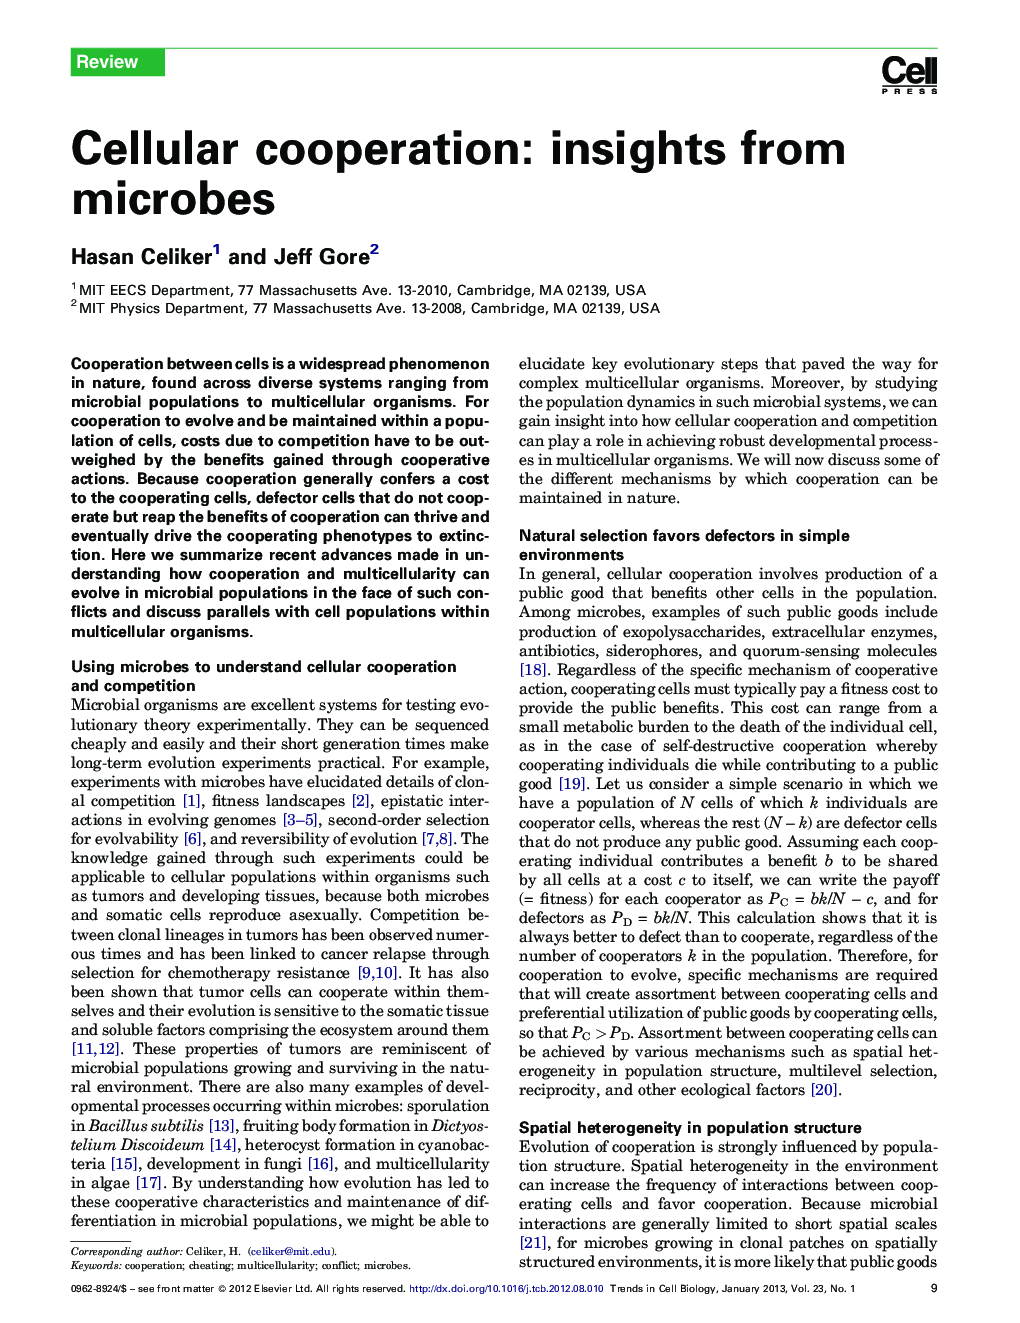 Cellular cooperation: insights from microbes